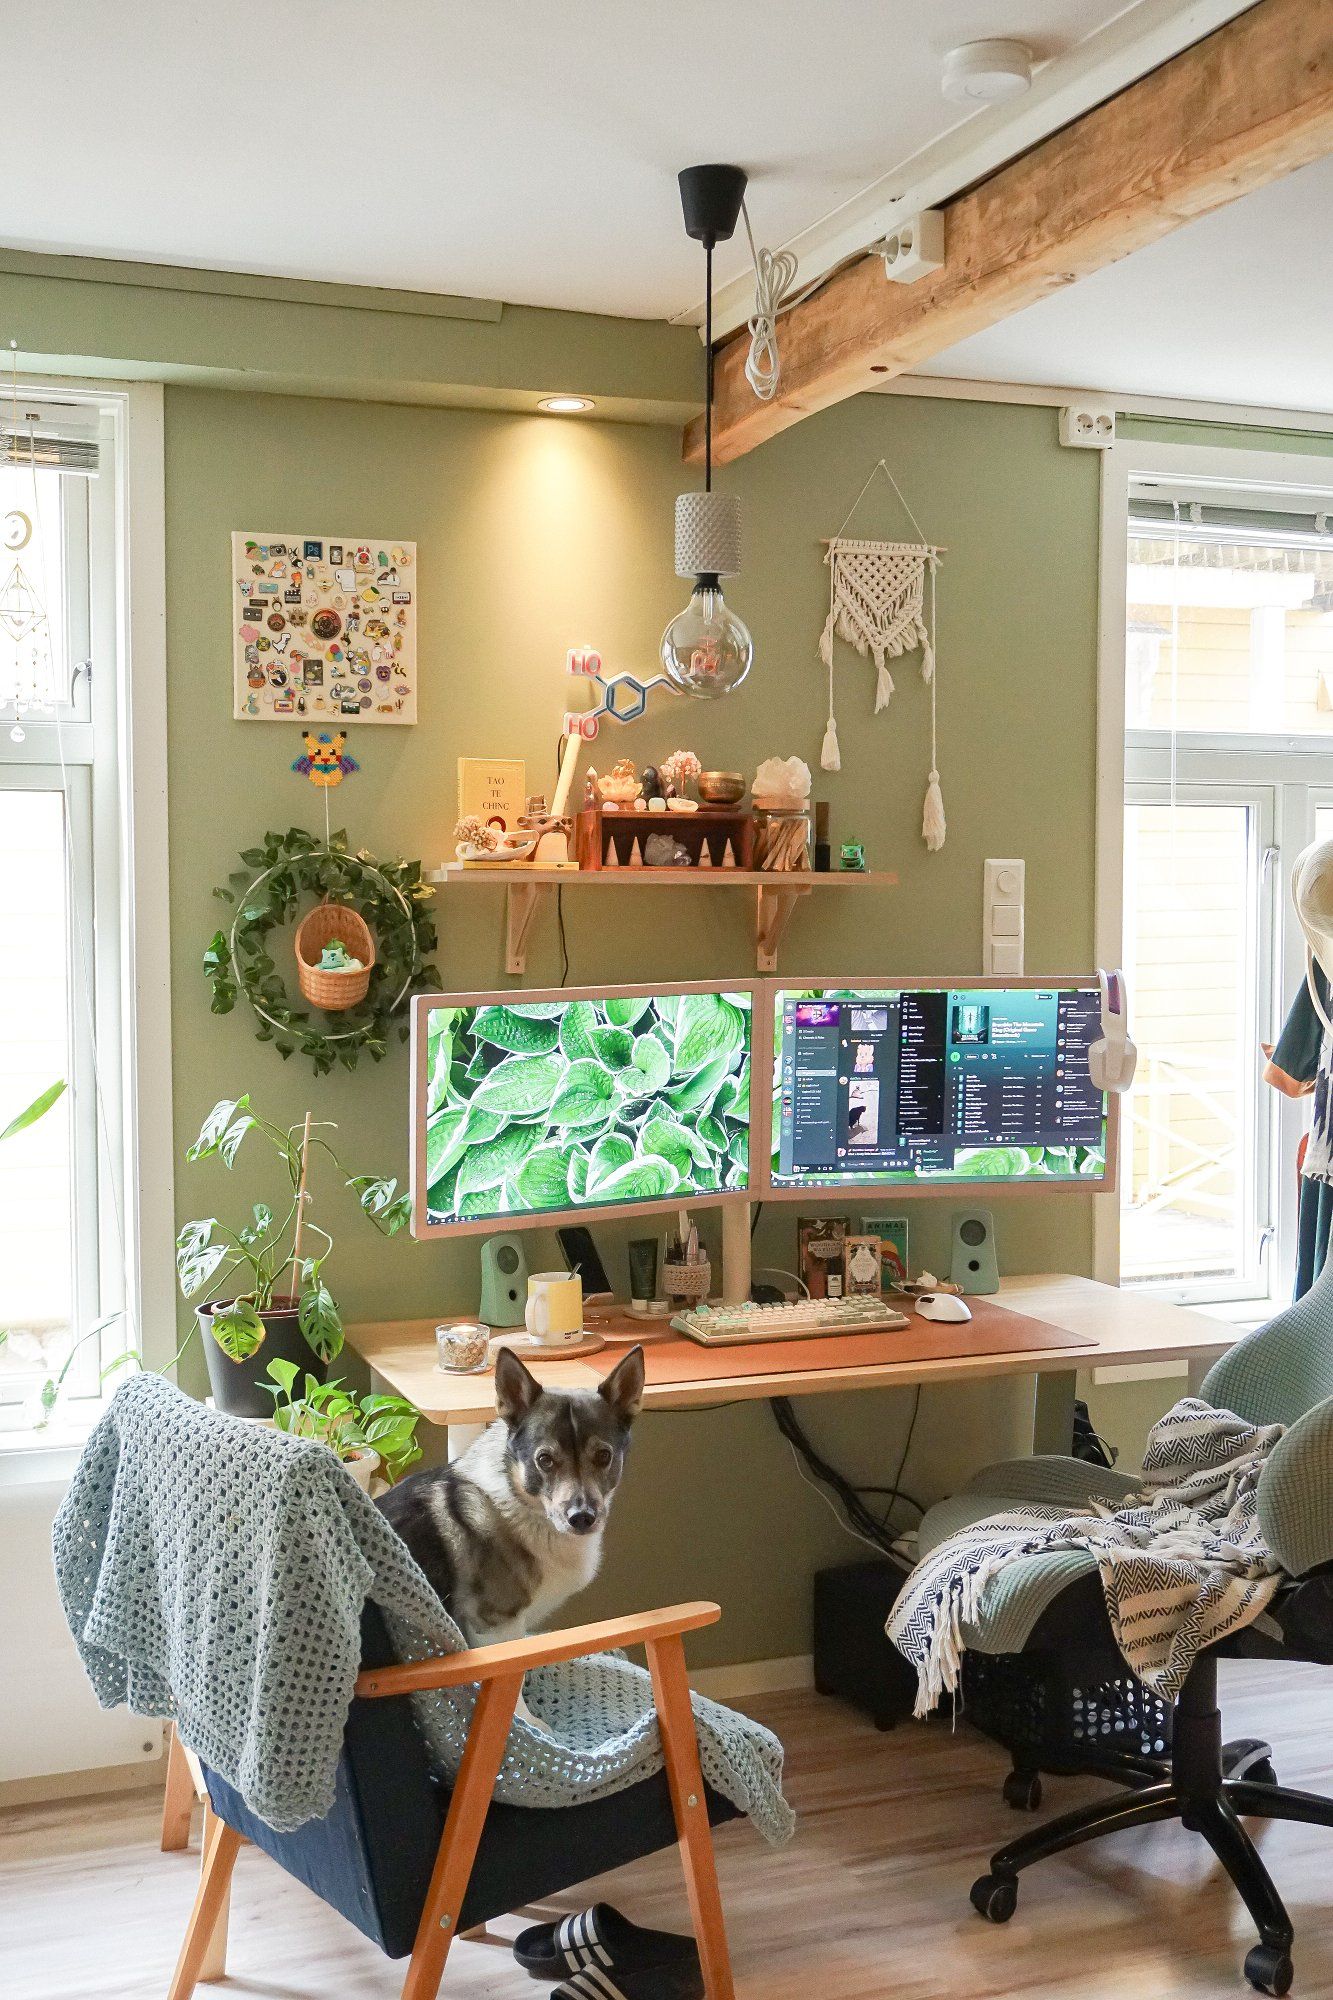 A dual-monitor home workspace setup with two chairs (one is reserved for a dog) and lots of plants